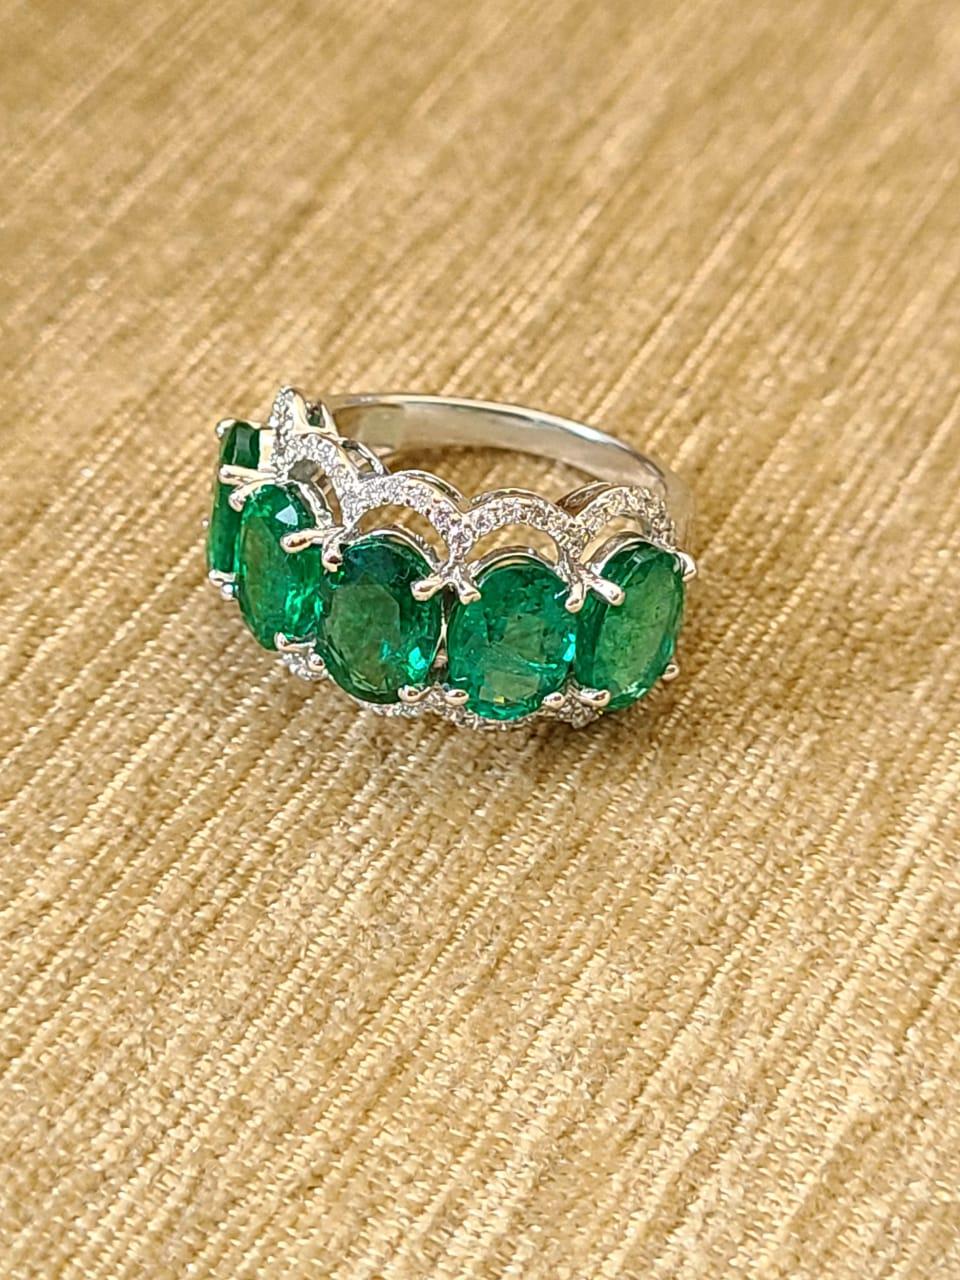 A very wearable Emerald and Diamonds Band Ring set in 18K Gold & Diamonds. The weight of the Emerald is 6.12 carats and is of Zambian origin. The Emeralds are completely natural, without any treatment. The weight of the diamonds is 0.45 carats. The